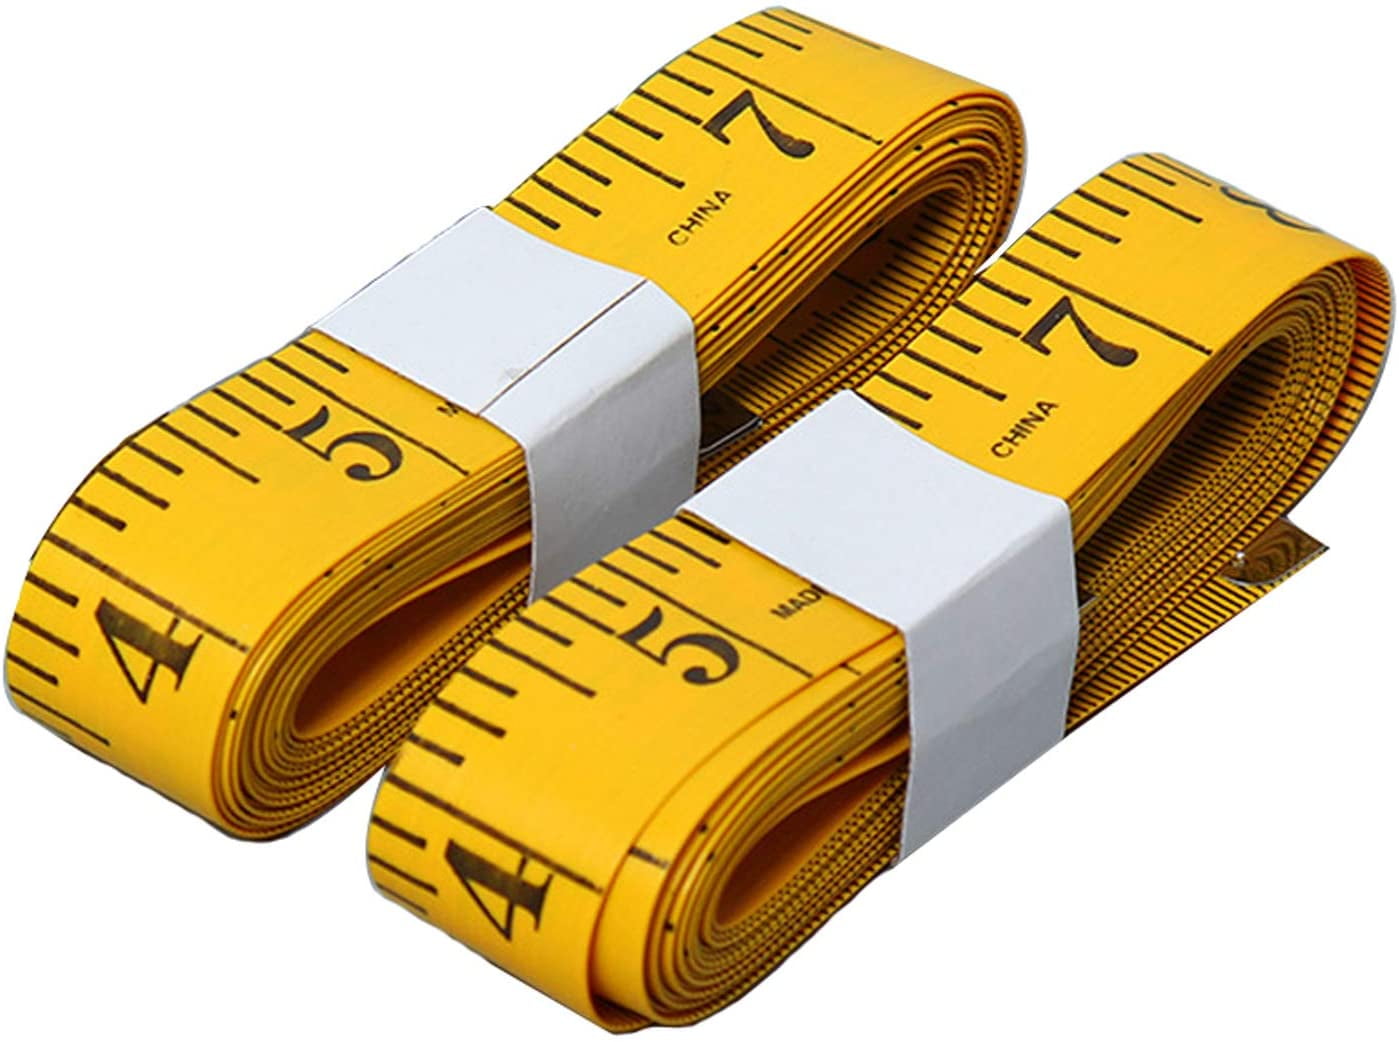 3d rendering of a yellow flexible sewing tape measure in a complete unwound  state on a white background. Long tape. Compact measuring tool. Getting ex  Stock Photo - Alamy